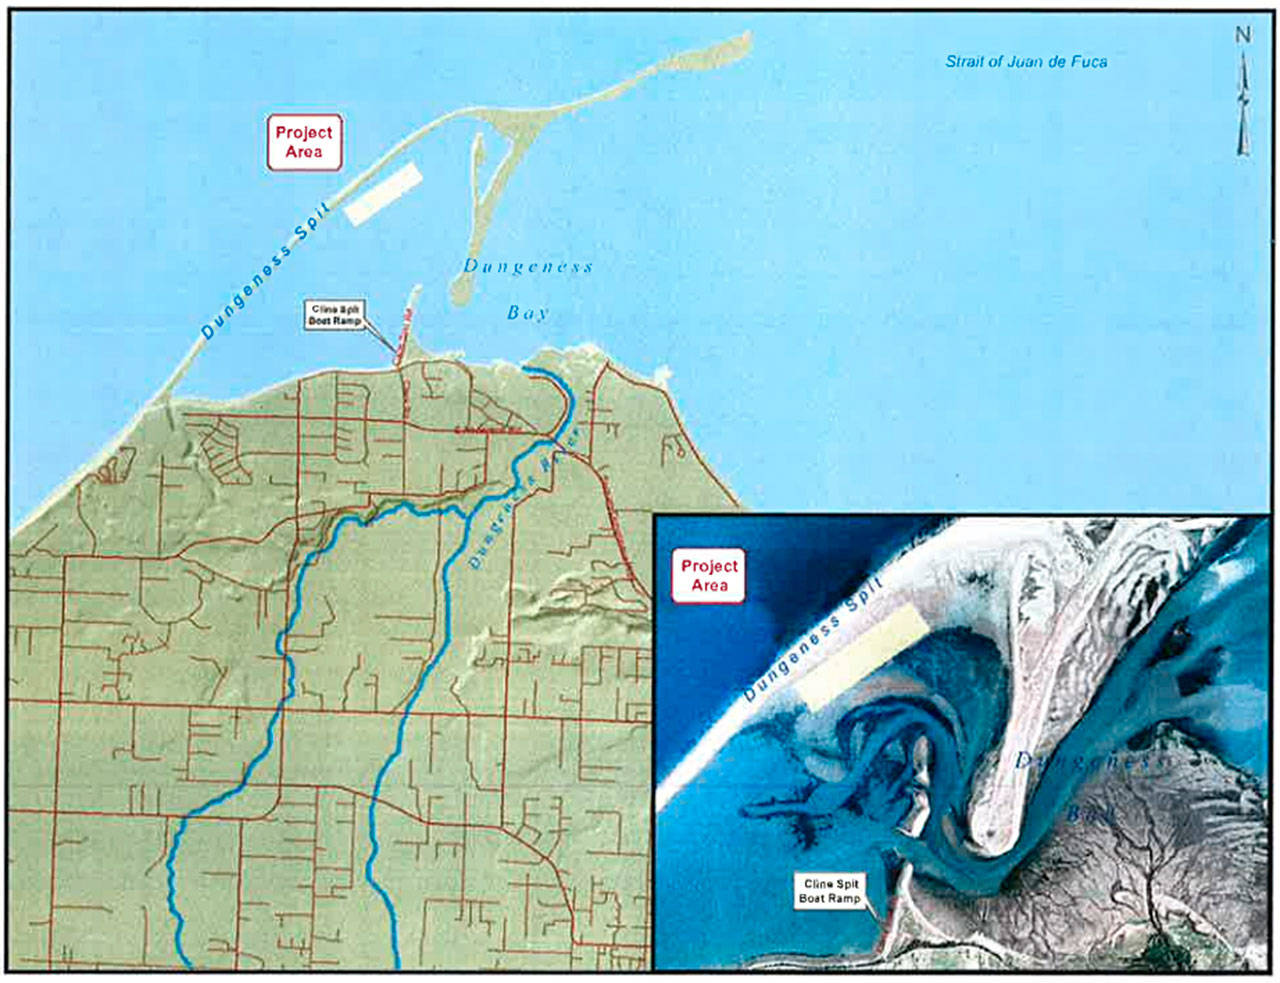 A map showing the location of the proposed oyster farm in Dungeness Bay.